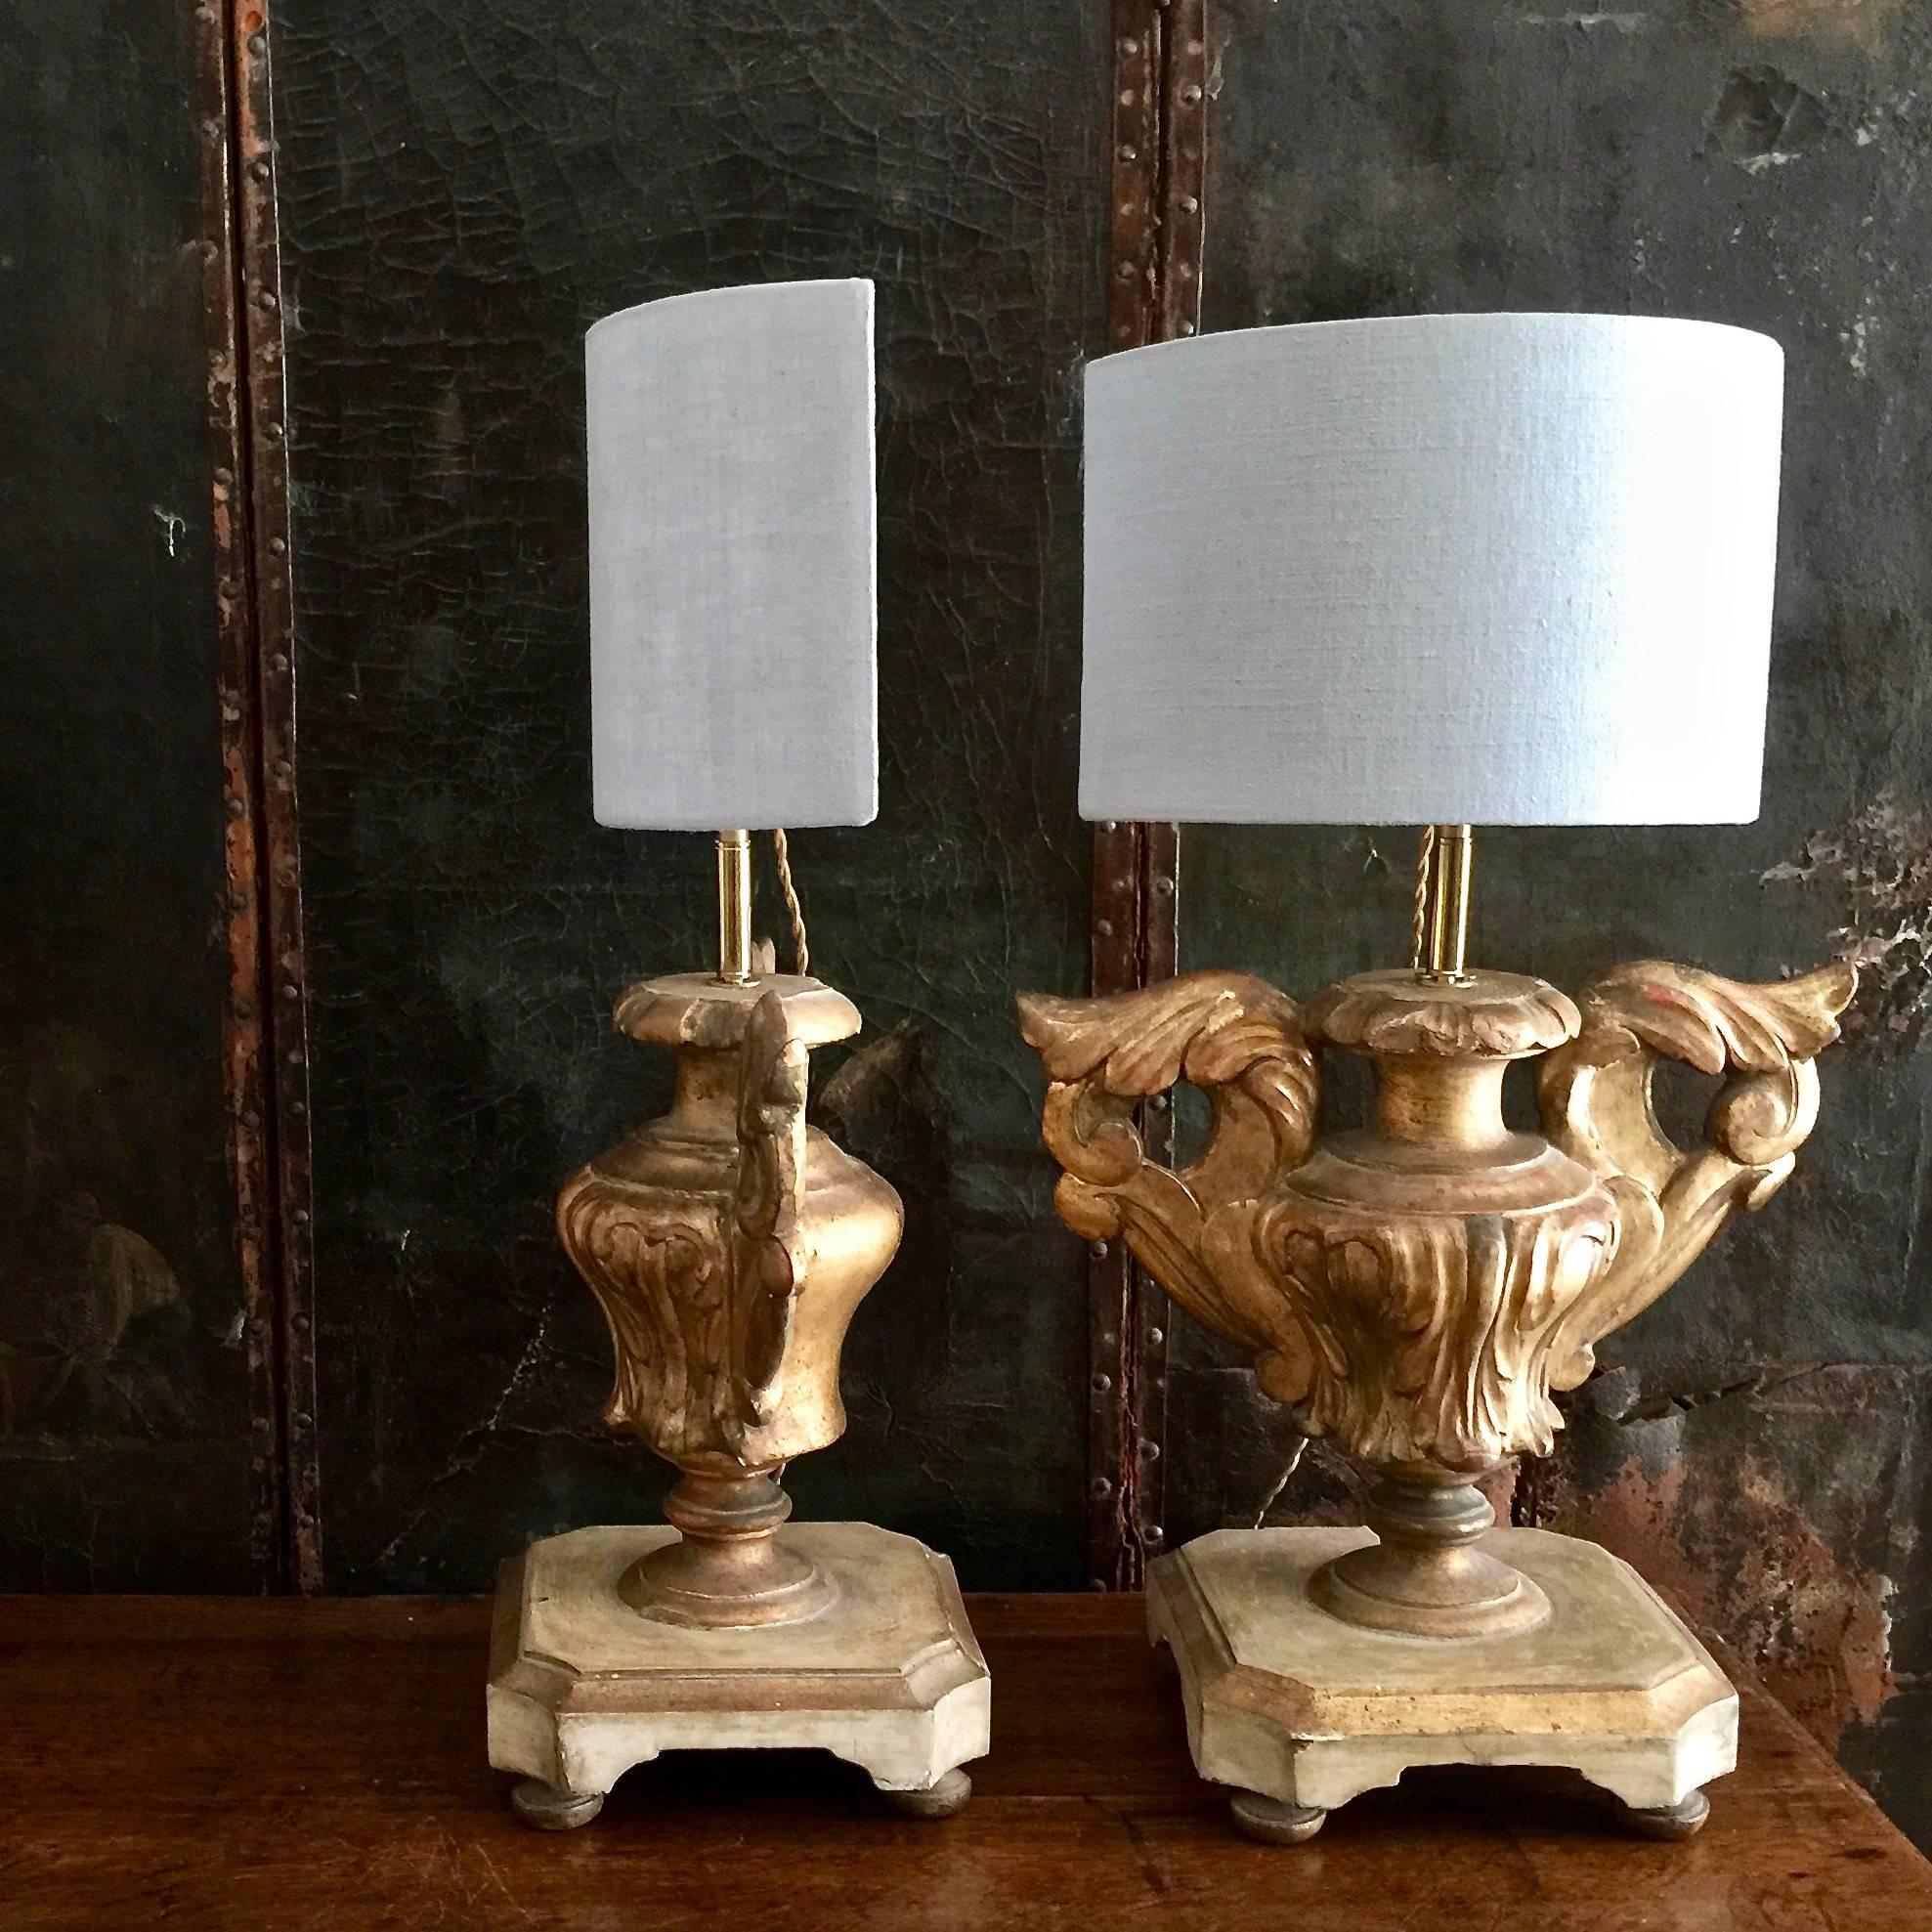 Pair of Italian 18th century candleholders in patinated gold giltwood with beautifully carved urn shape made as lamps with custom-made pale blue color half shape linen shade. Classic and timeless for any decor.
Measures: Shade 12 in W 5 in D